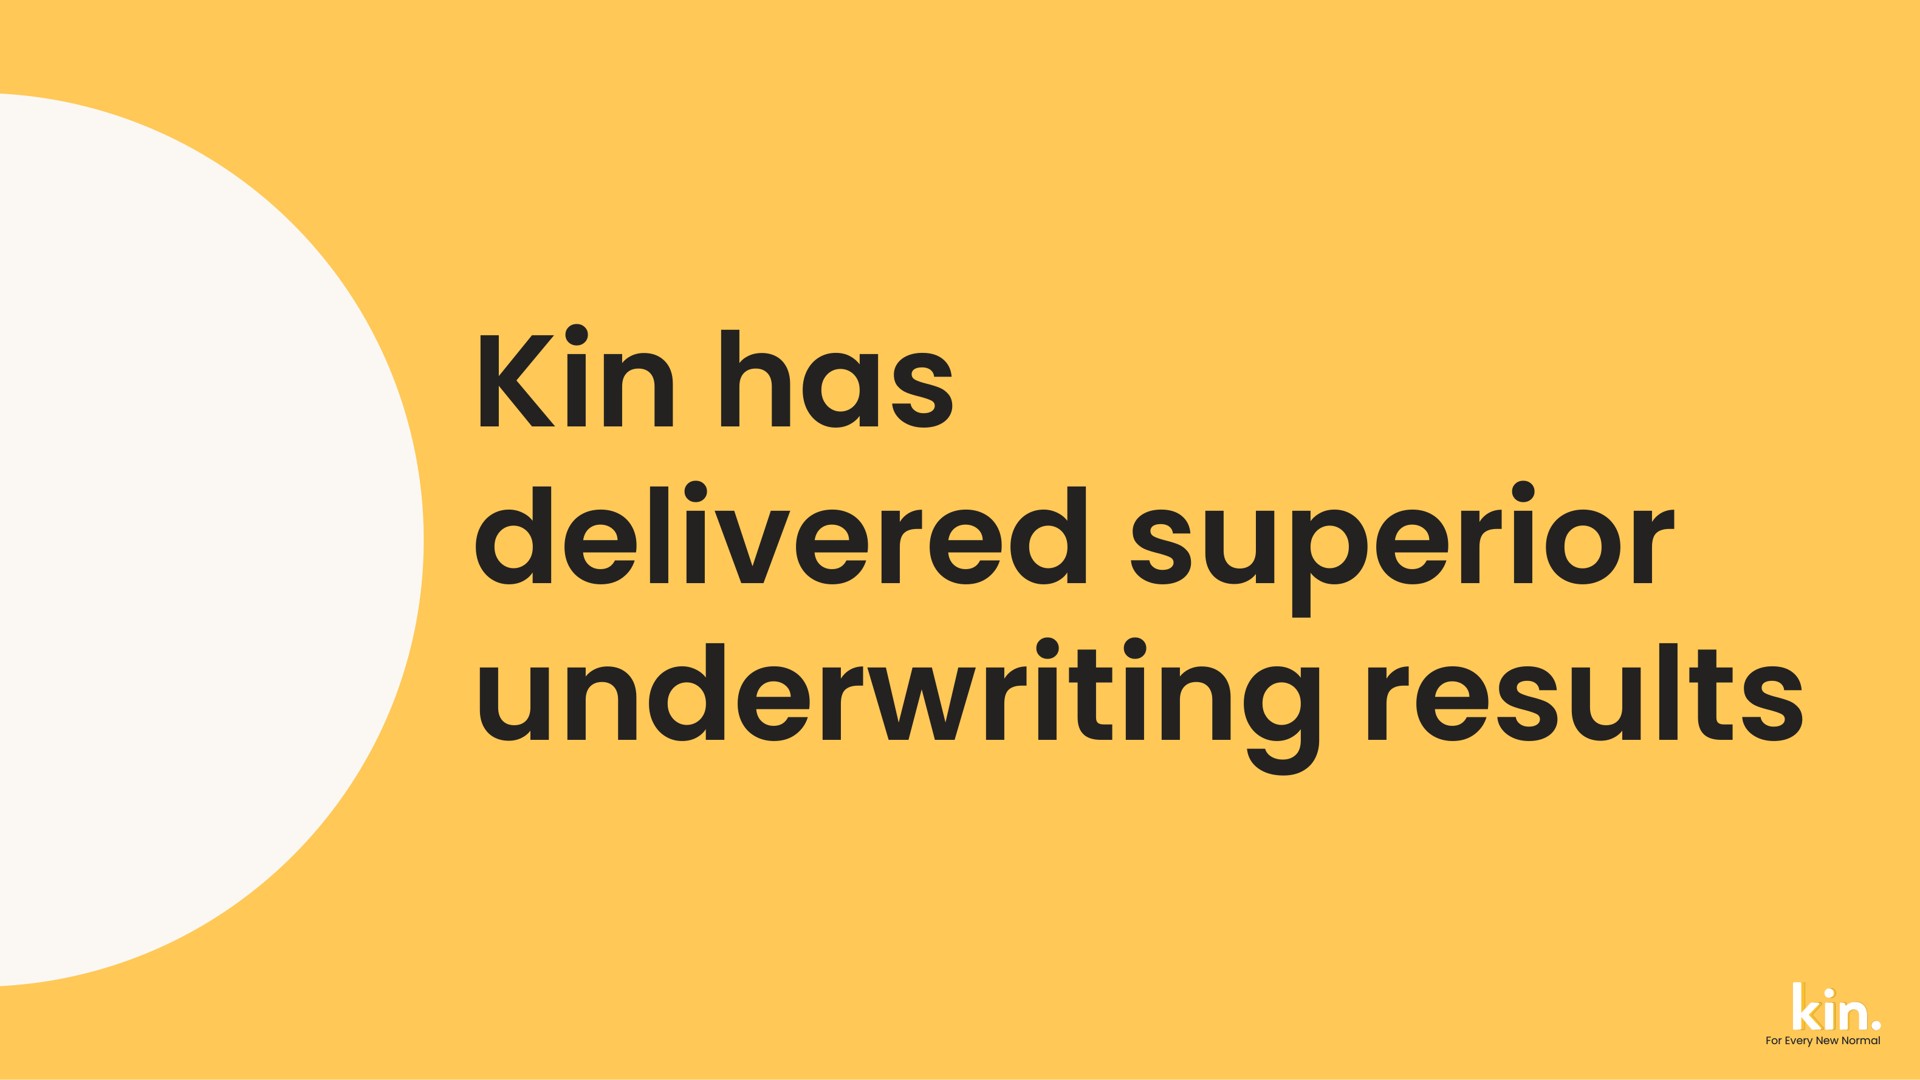 kin has delivered superior underwriting results | Kin